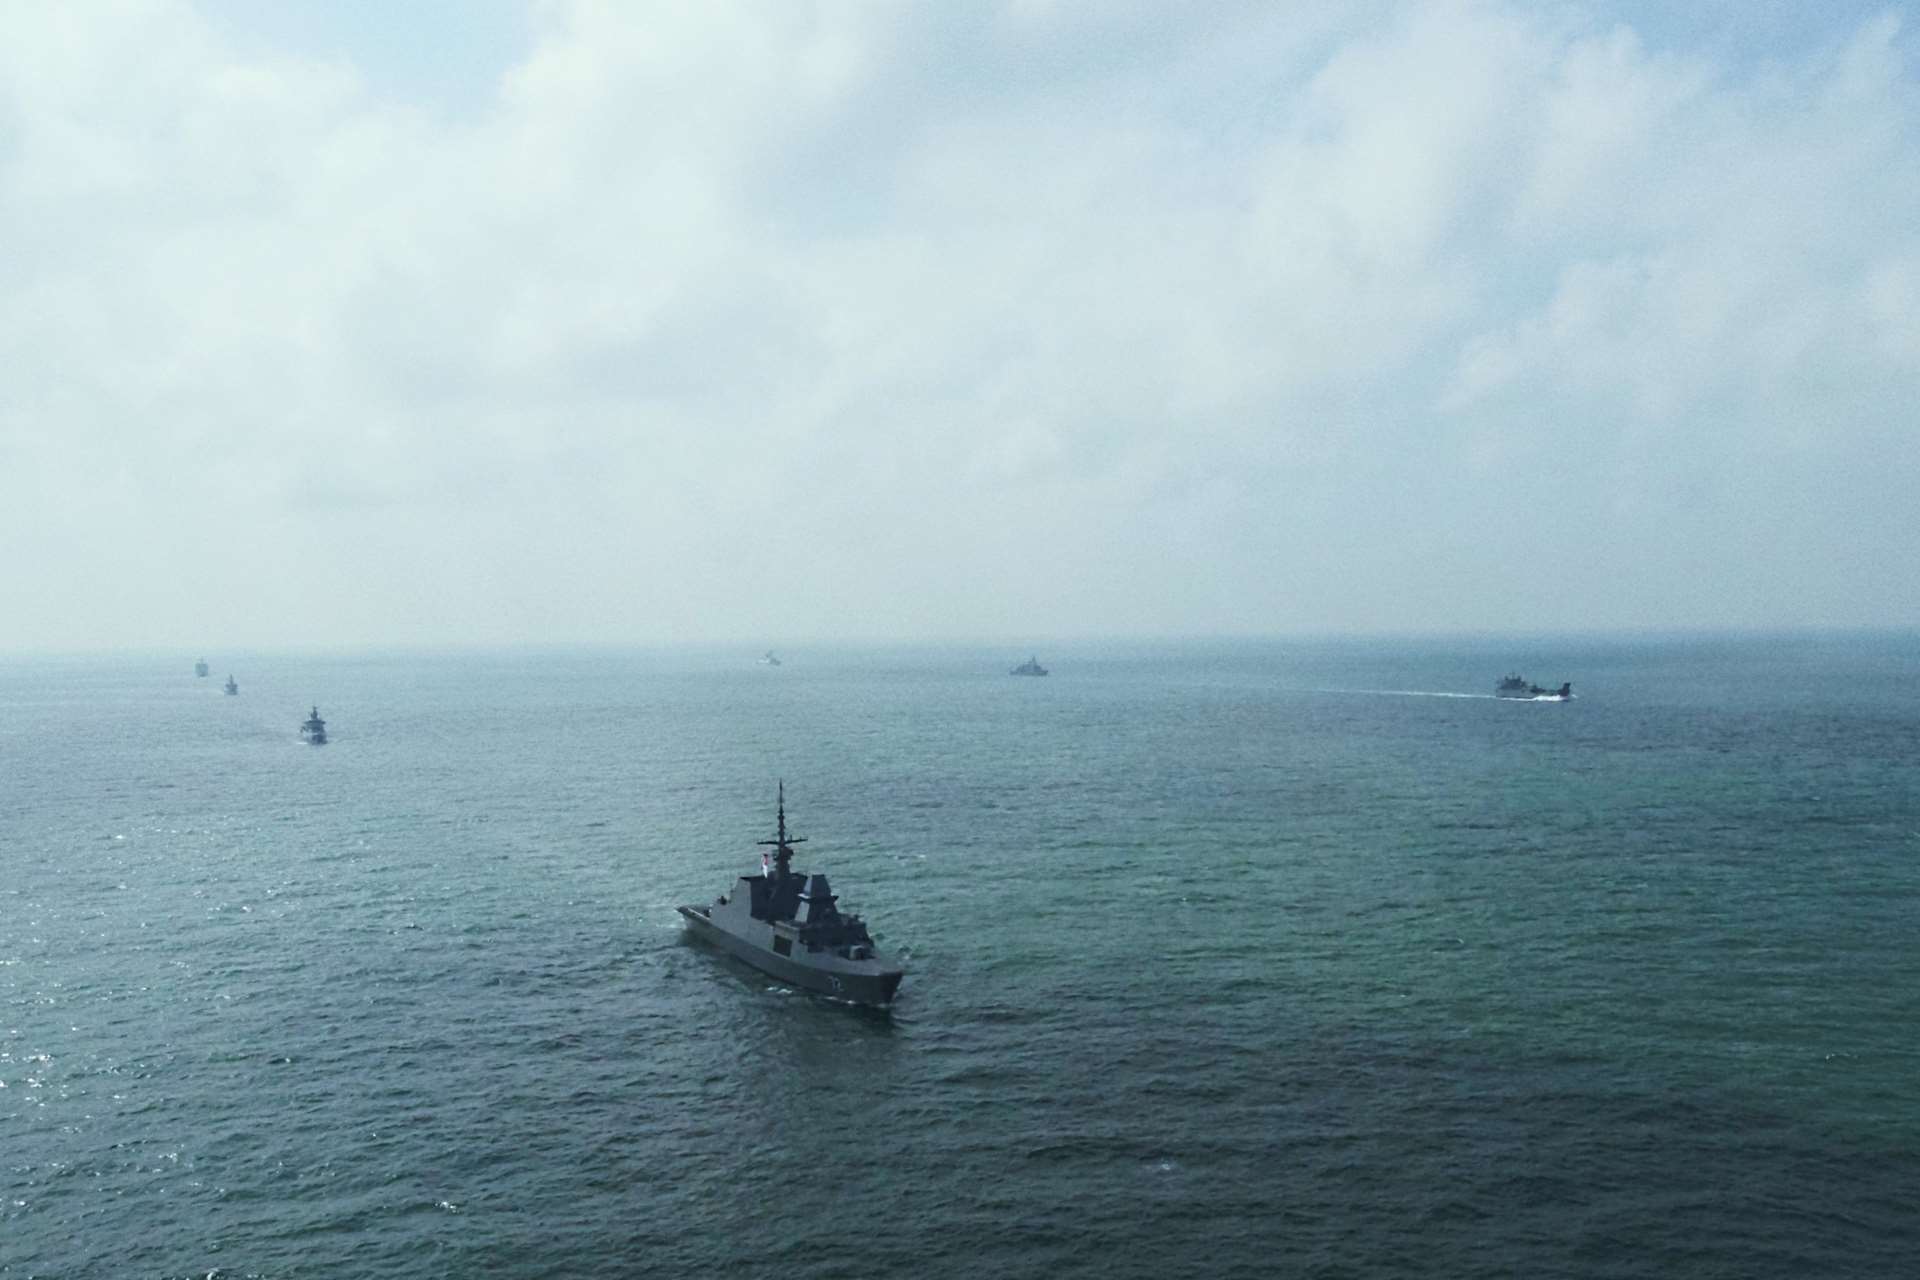 ASEAN and China navies, including the Republic of Singapore Navy (RSN), sailing in formation during the ASEAN-China Maritime Exercise.